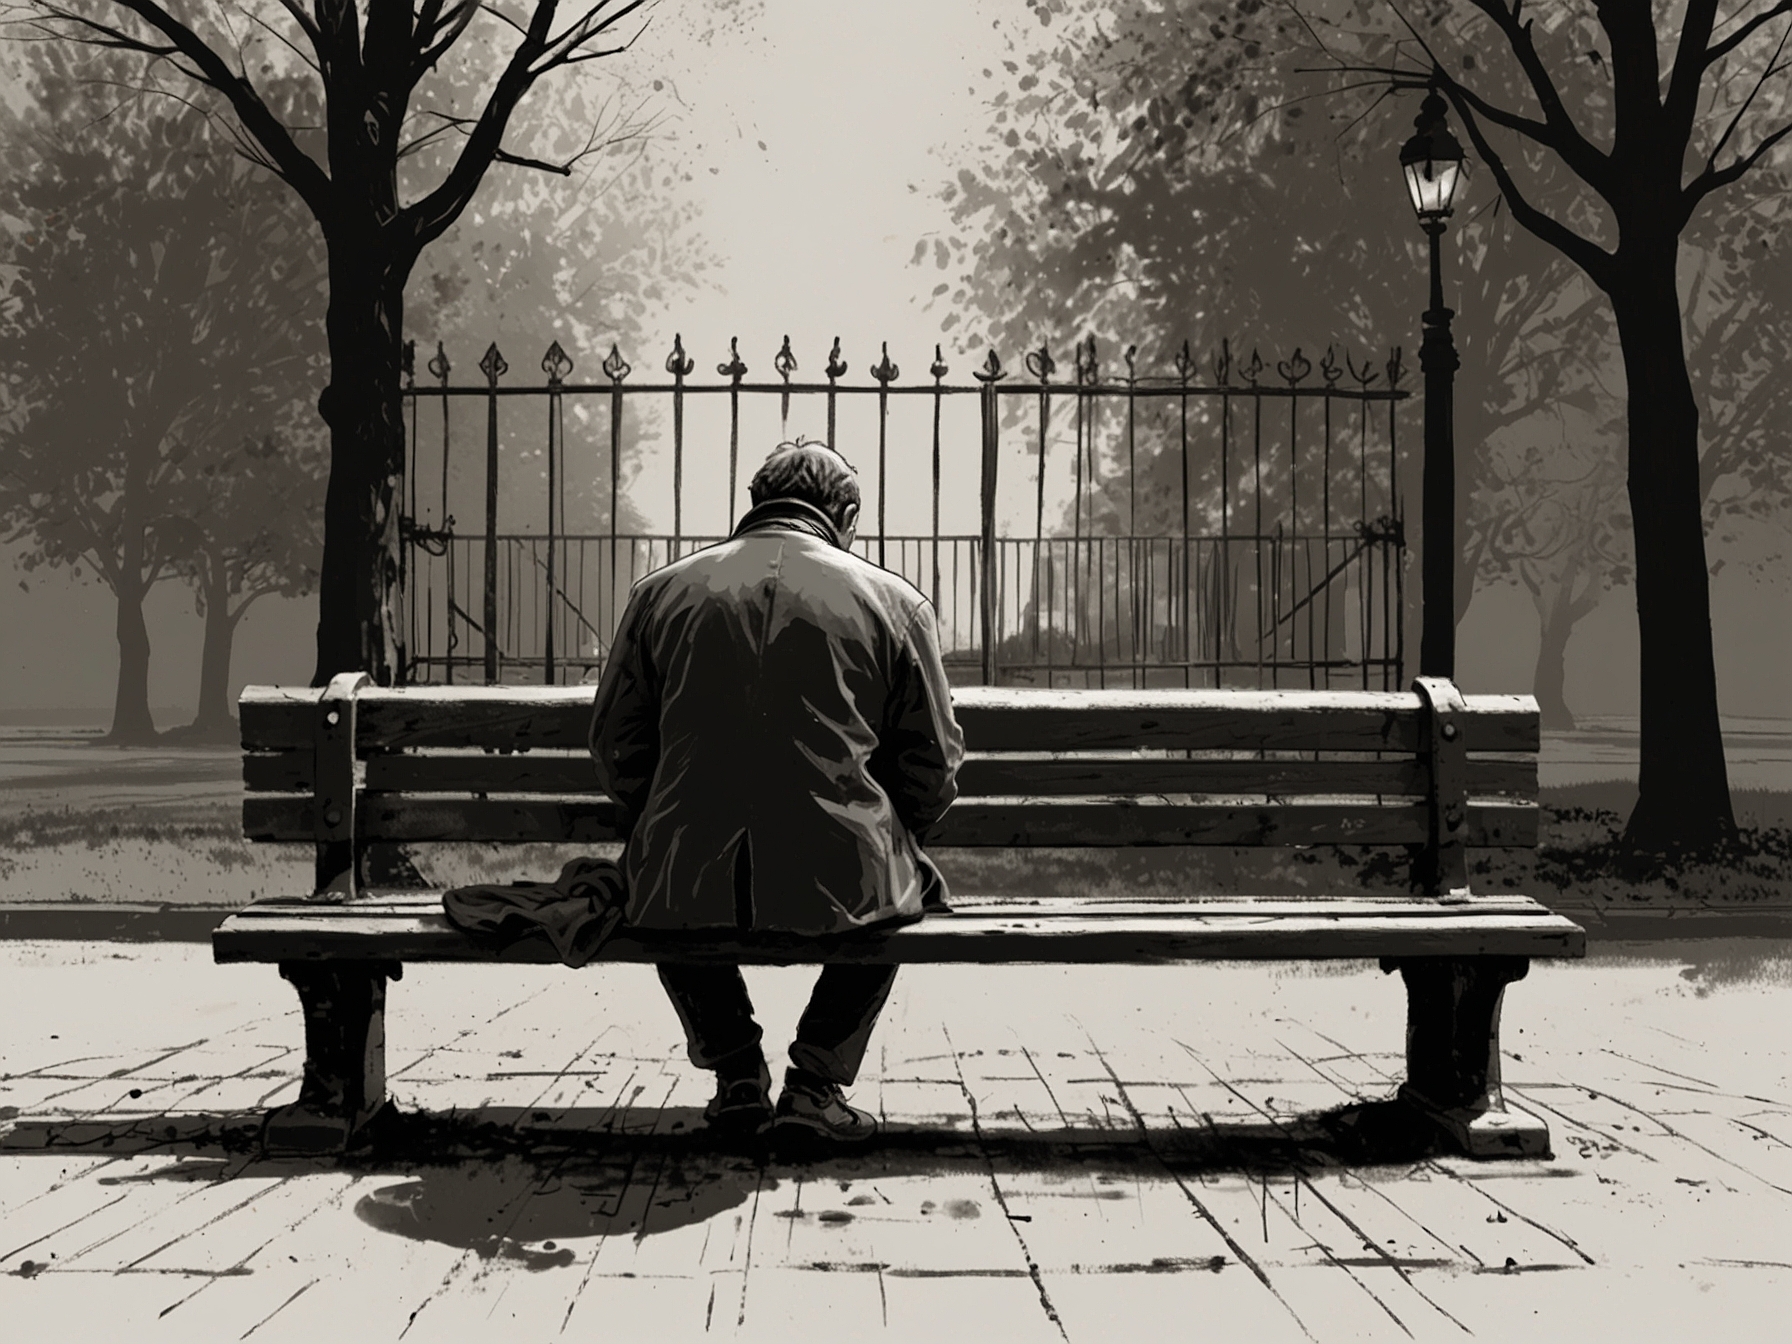 A lonely man sitting on a bench, representing the struggle of being alone.